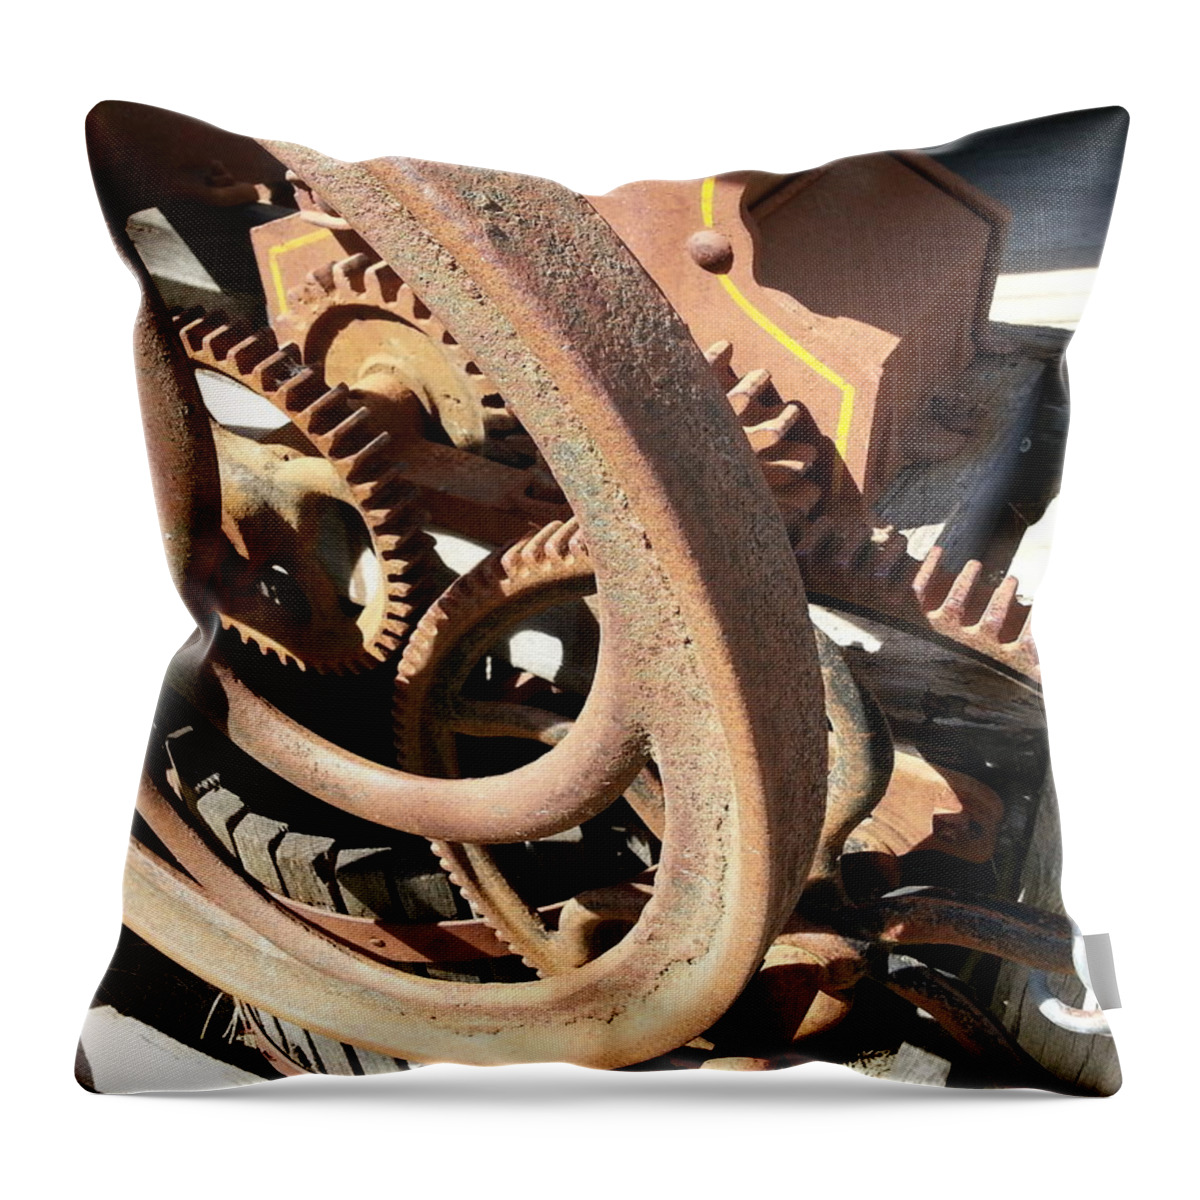 Industrial Throw Pillow featuring the photograph Better Days by Caryl J Bohn